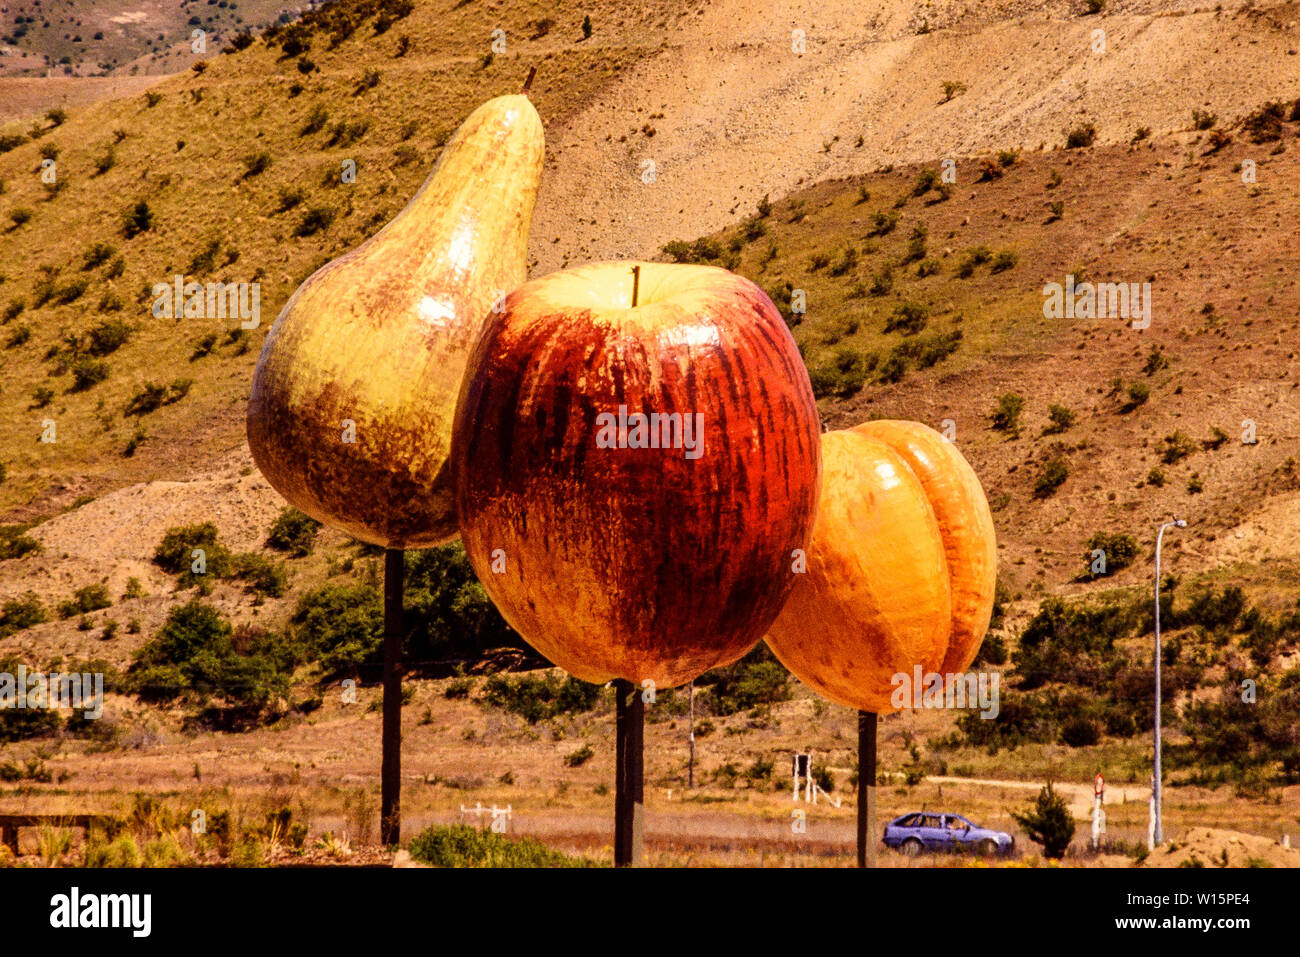 New Zealand, South Island. Giant sculptures of an apricot, apple, pear and nectarine in Cromwell.  Photo taken November 1989. Photo: © Simon Grosset. Stock Photo